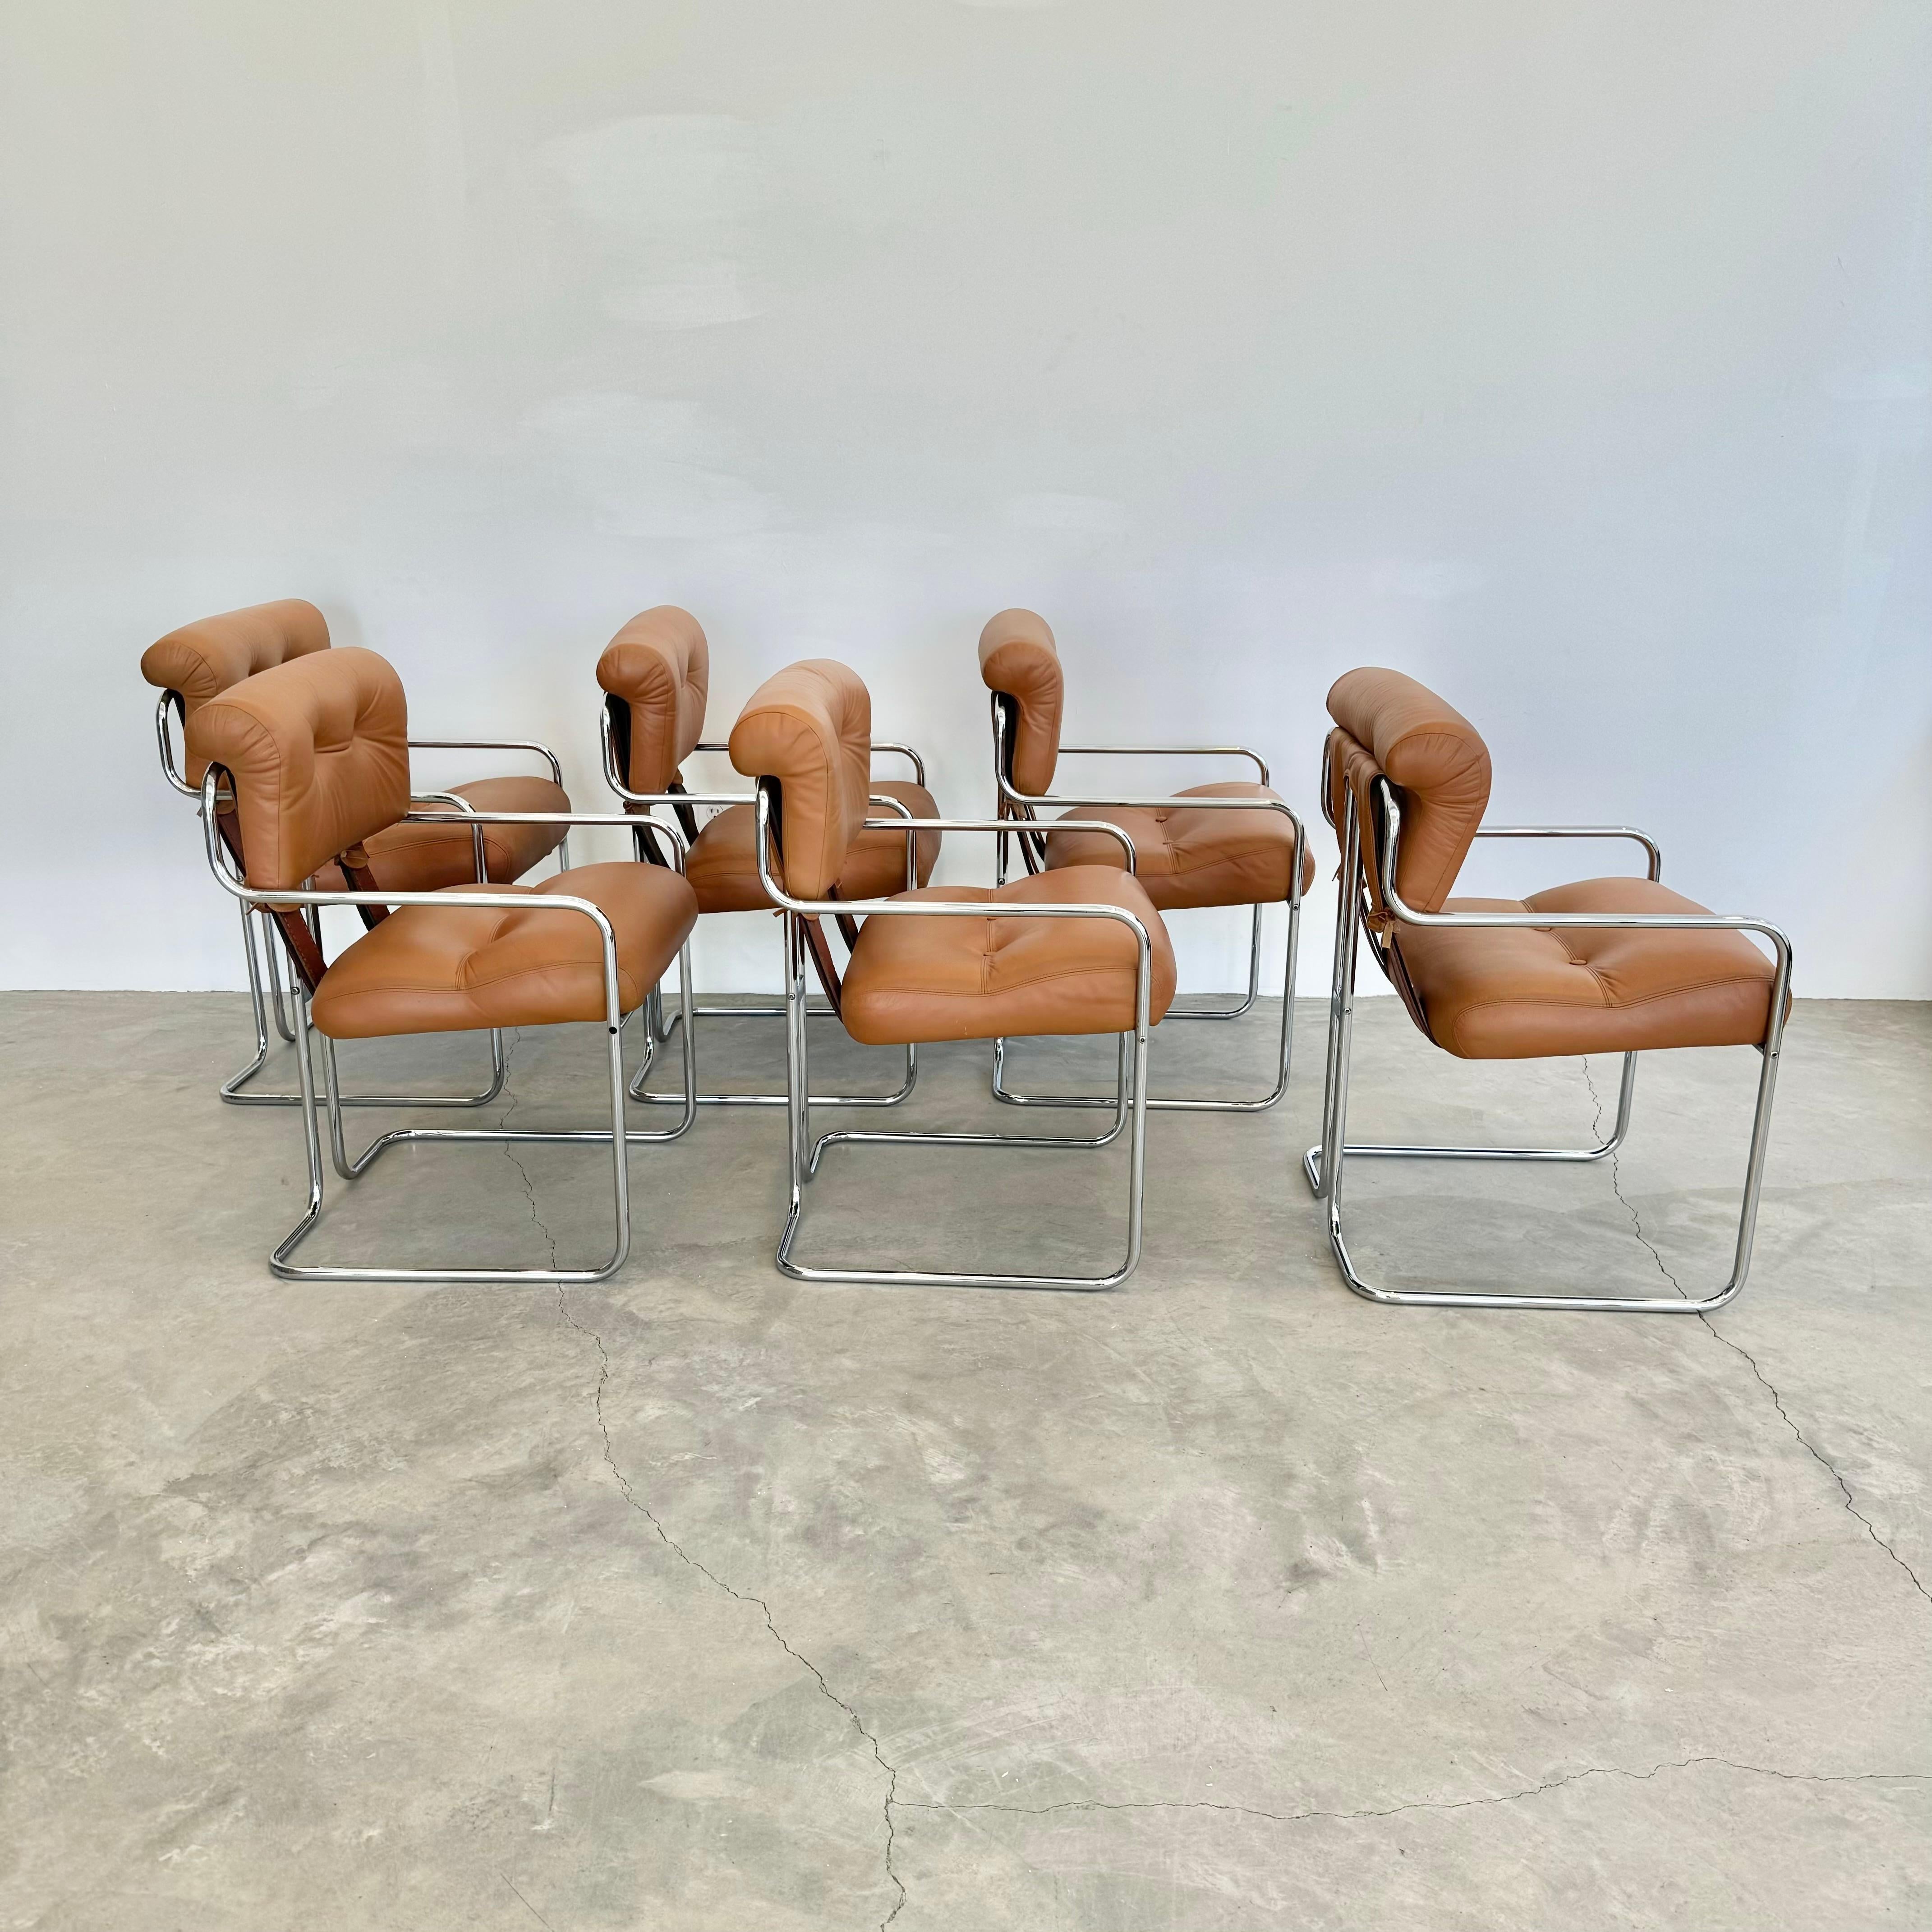 Set of 6 'Tucroma' Chairs in Tan by Guido Faleschini, 1970s Italy For Sale 6